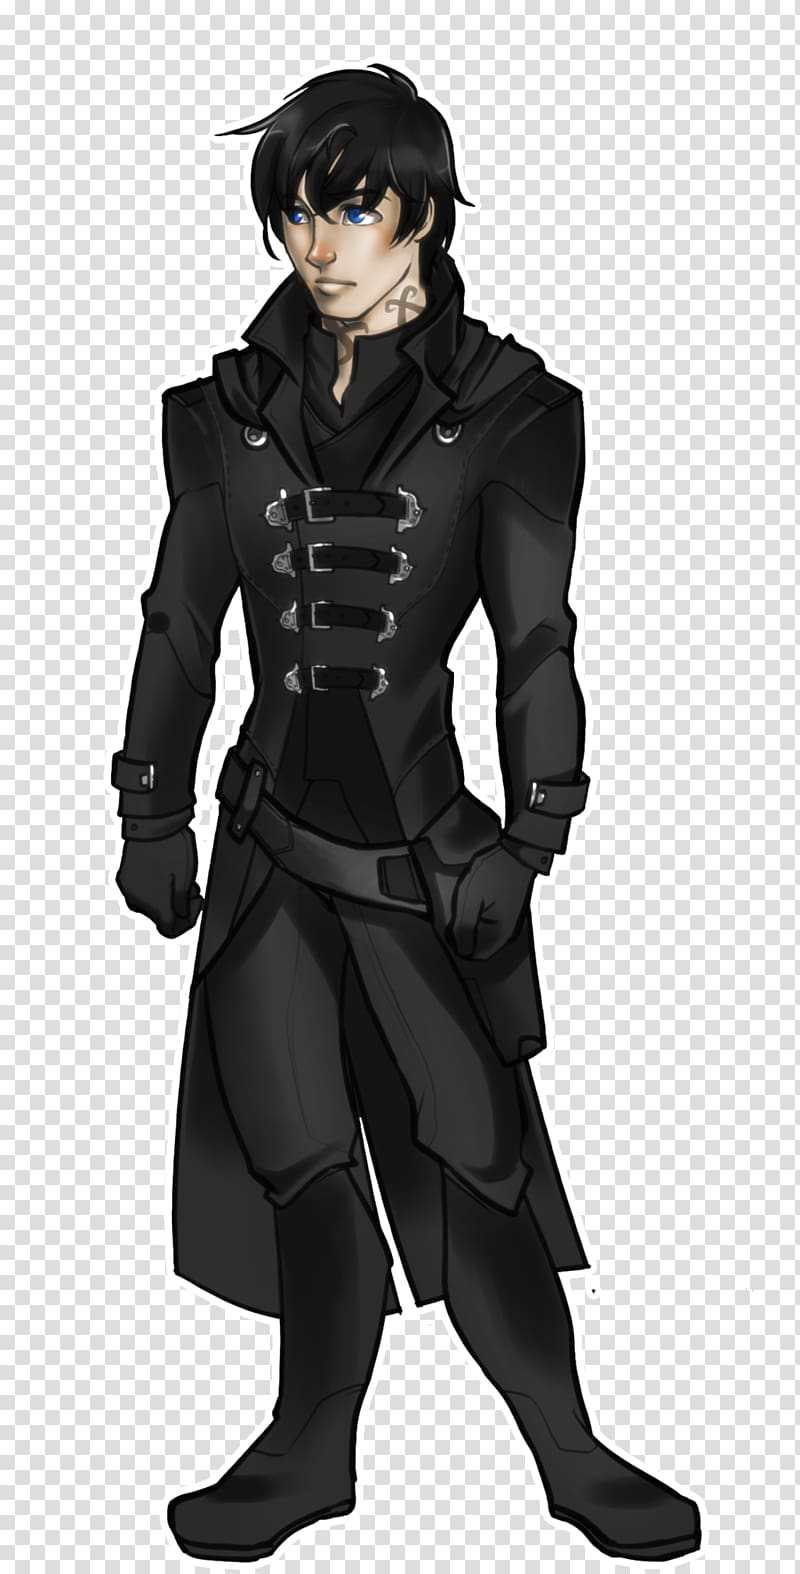 Jace Wayland Shadowhunters Drawing The Mortal Instruments Actor, zatanna transparent background PNG clipart